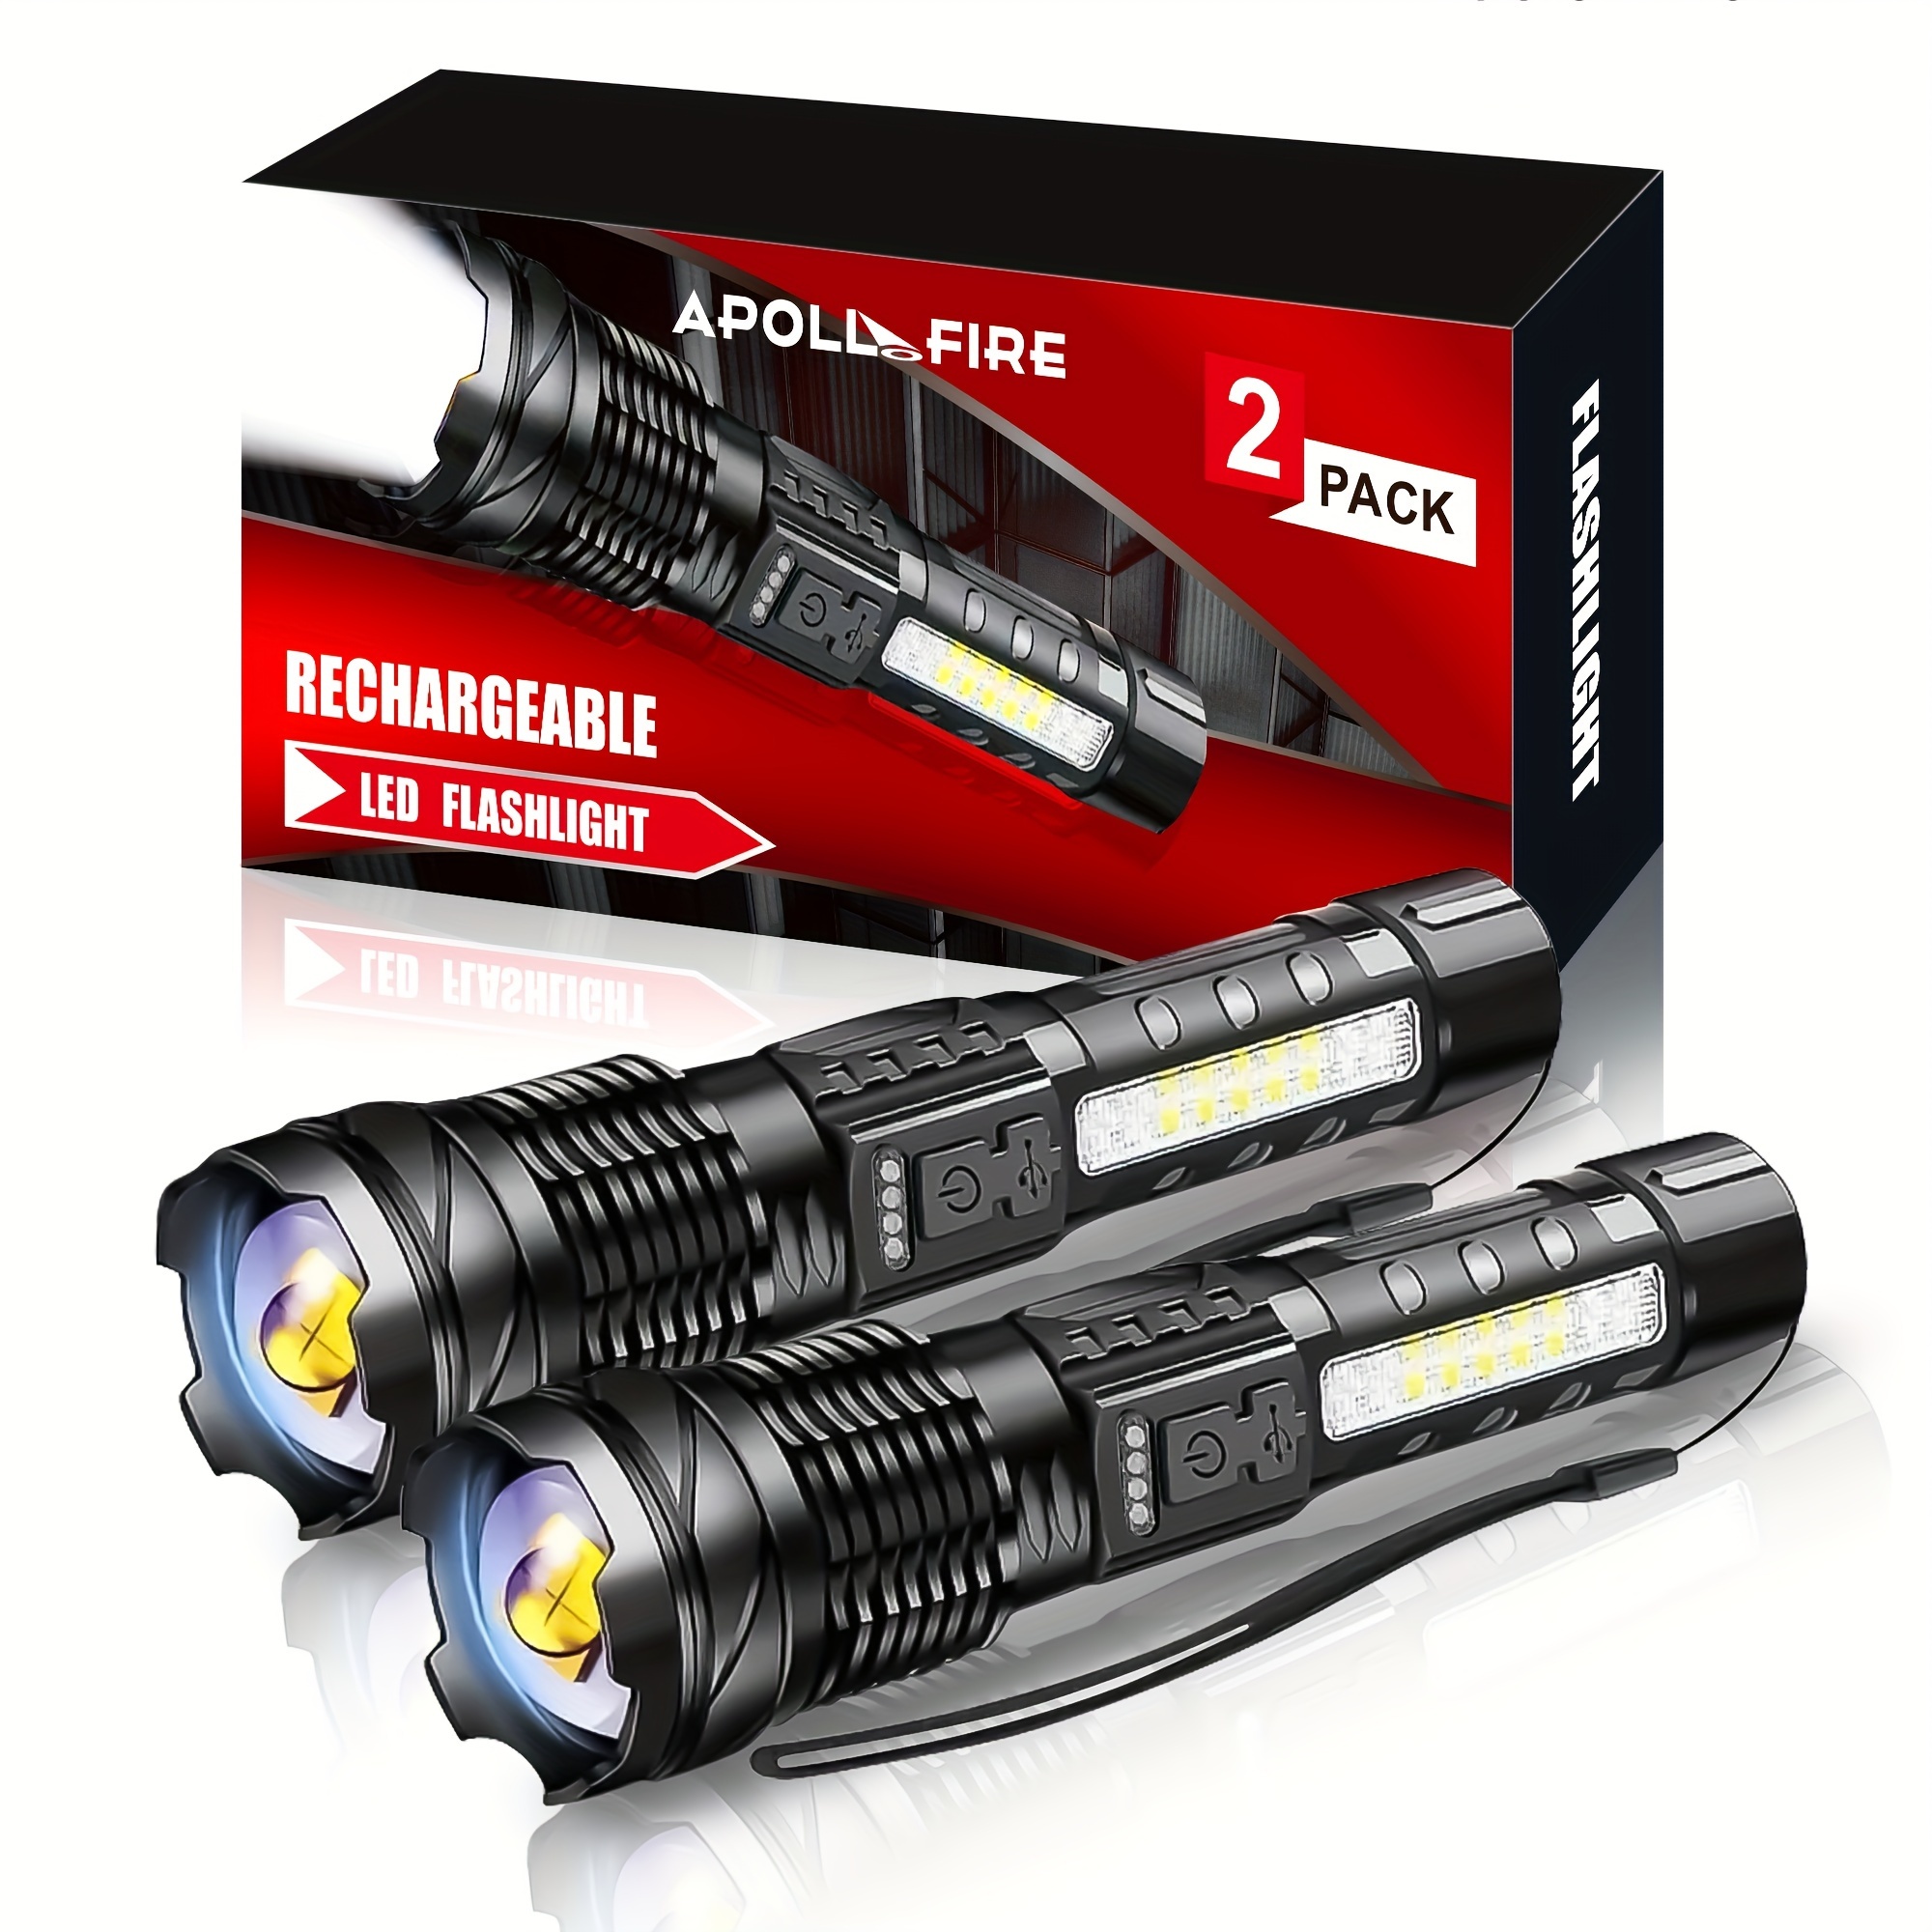 

1pc/2pcs Led Rechargeable Zoom Tactical Flashlights, Powerful, Portable & Durable Led Light For Outdoor Hiking Camping